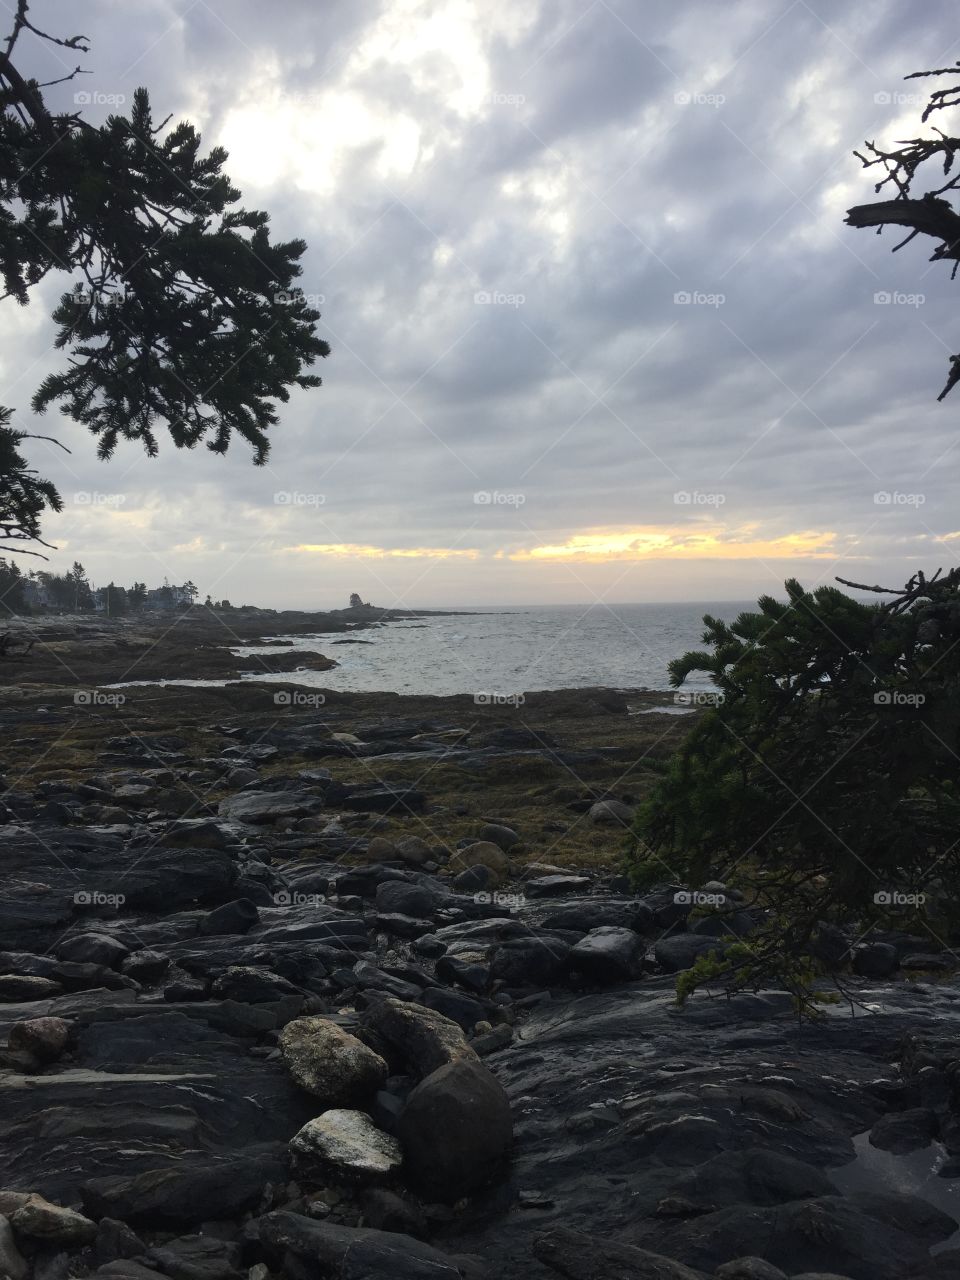 Hidden ocean view with pine trees and a rocky shoreline under a cloudy and gray sky. 